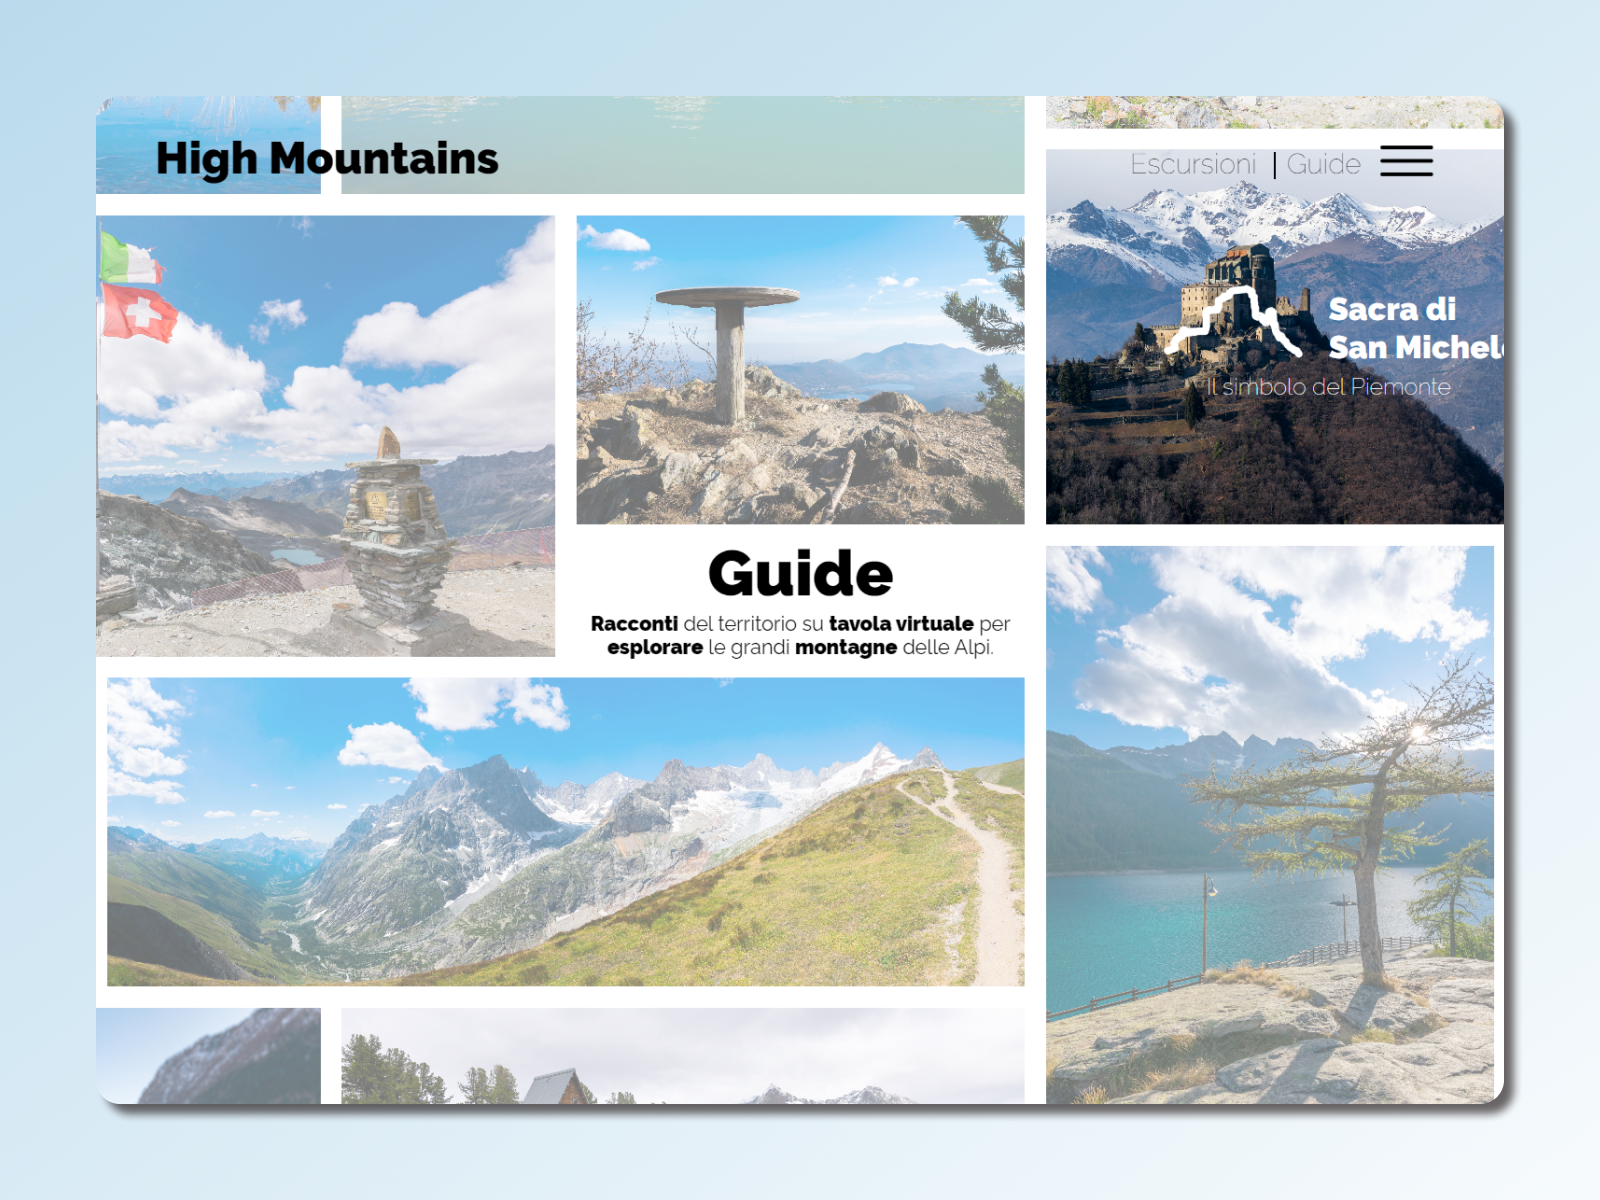 High Mountains - Guides: virtual table to explore stories of places